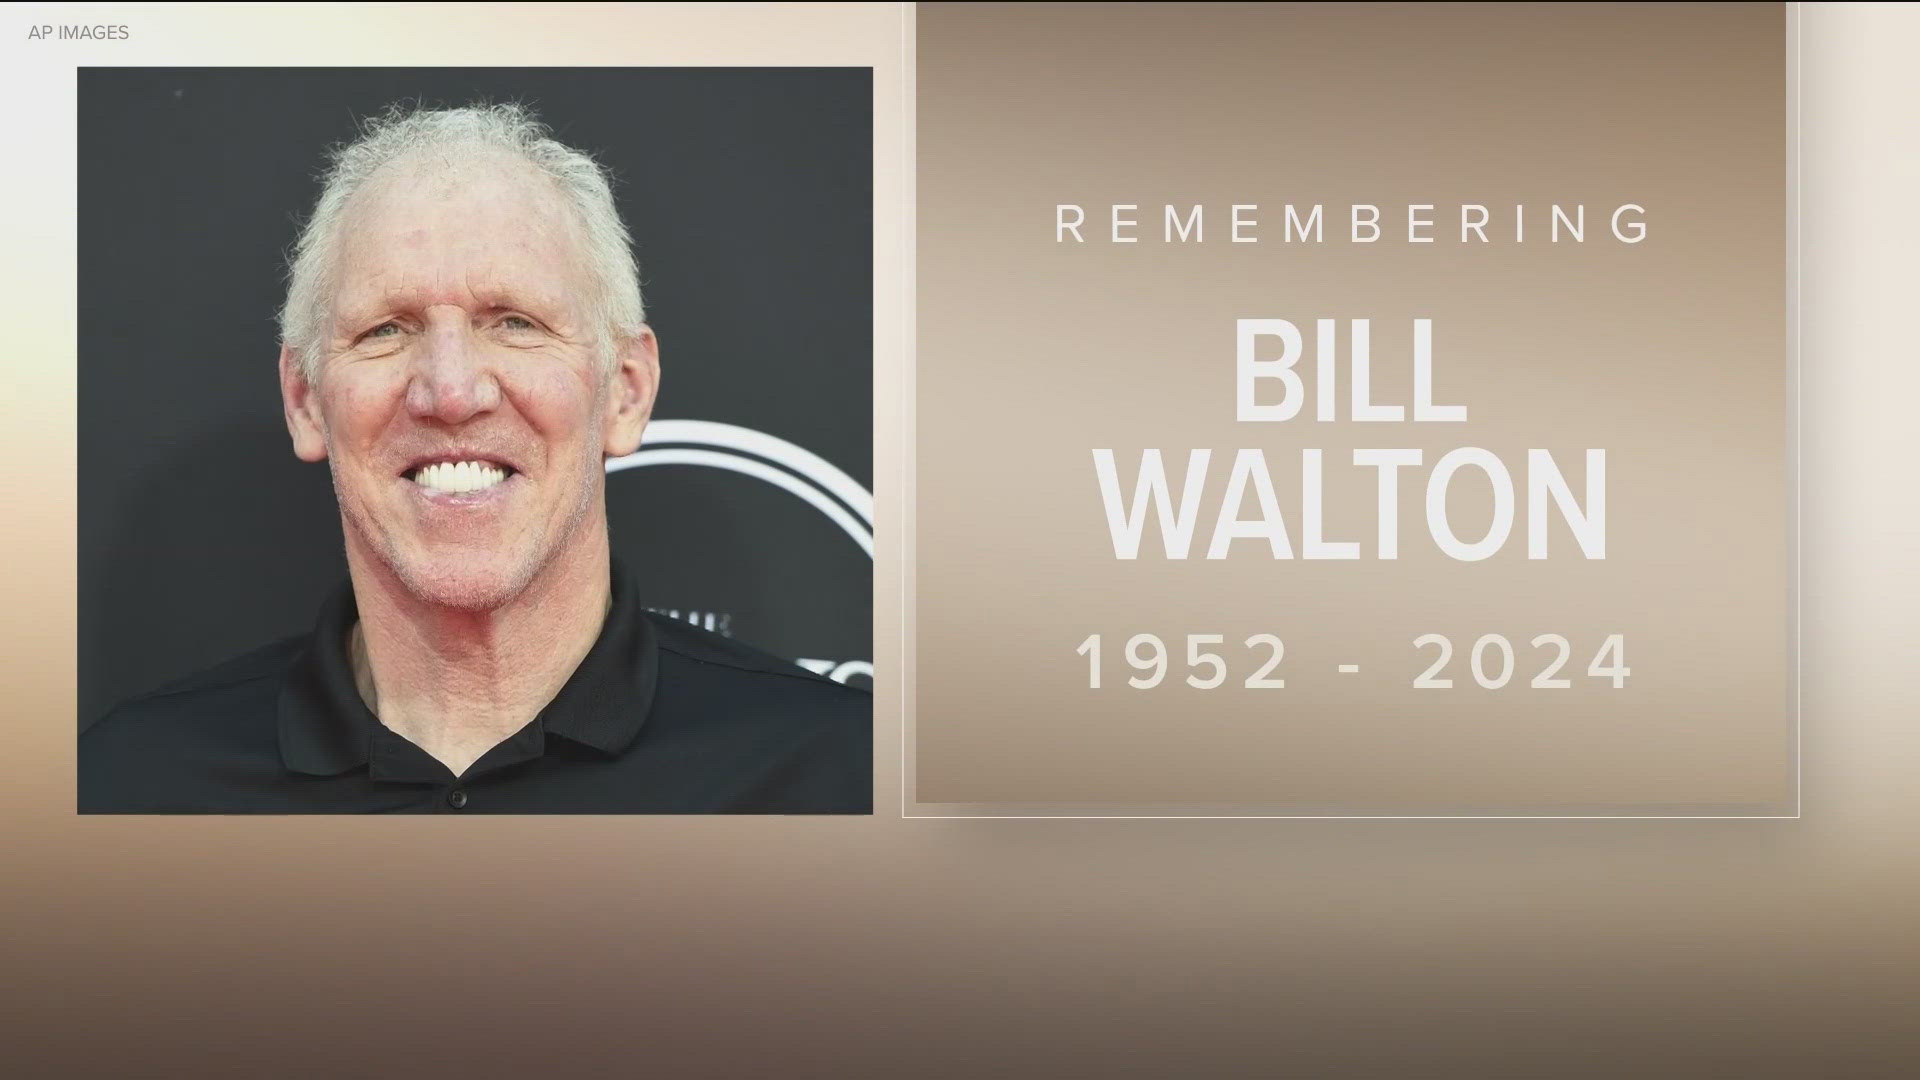 Walton's reach extended well beyond the basketball court. CBS 8's John Howard looks back on what made Walton such a positive, energetic part of San Diego.